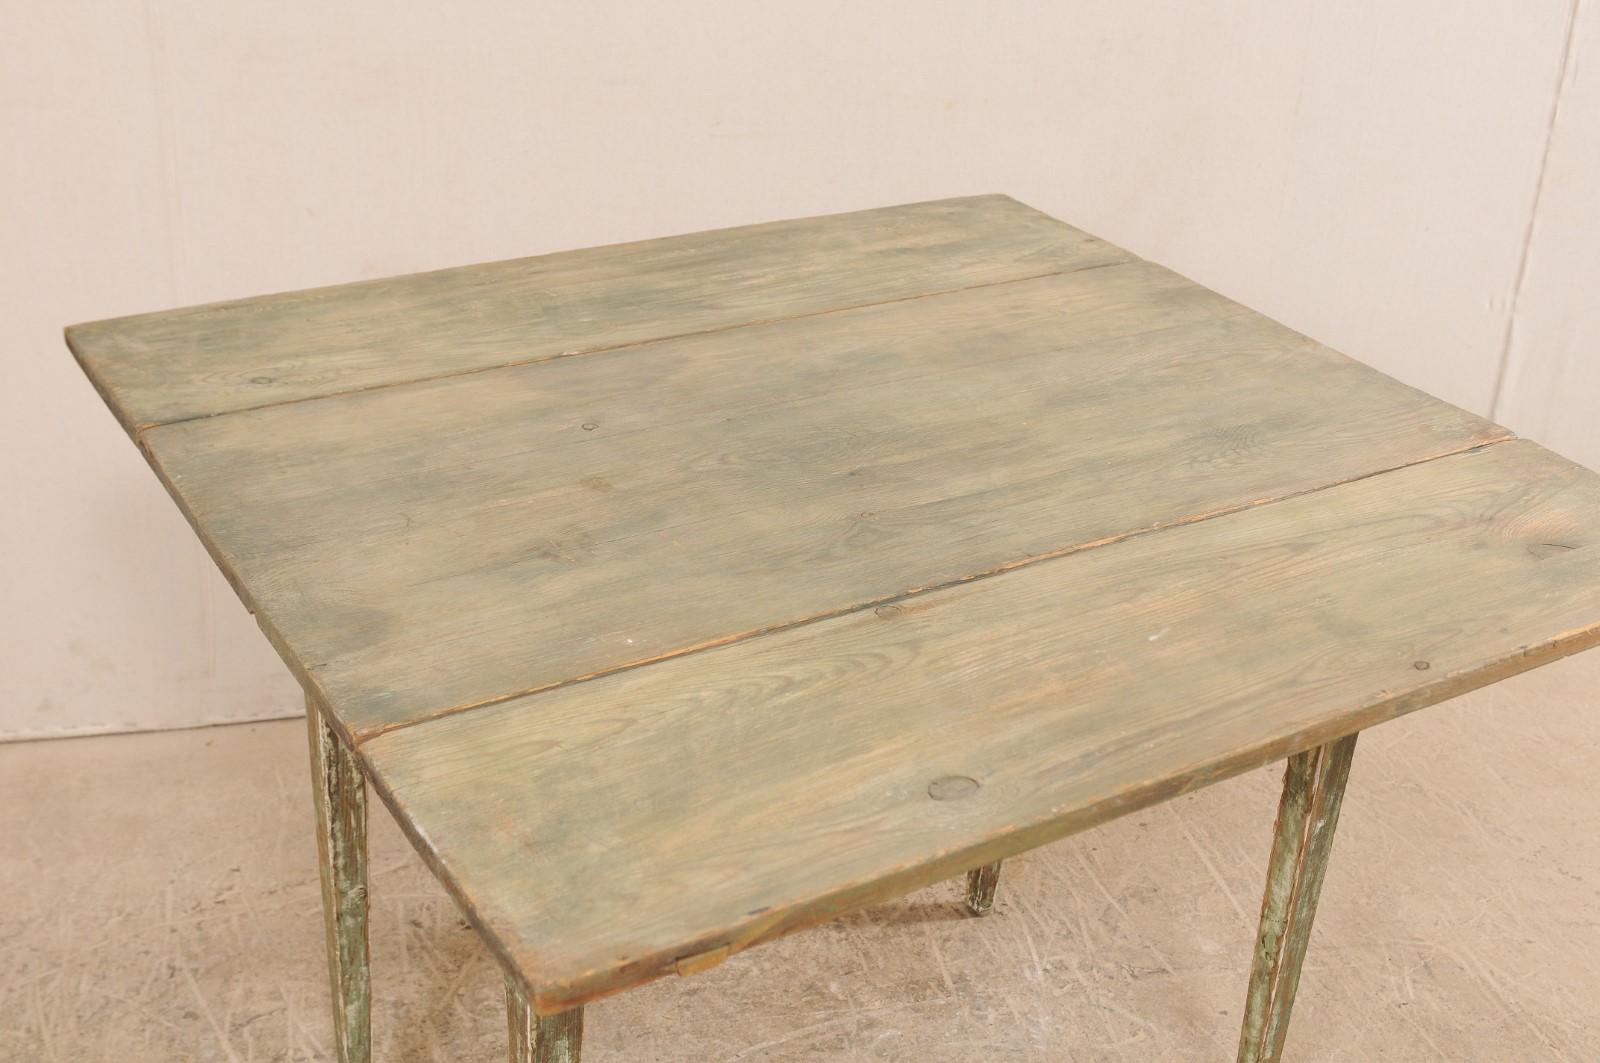 19th Century Swedish Painted Wood Drop-Leaf Table with Original Paint (Holz)